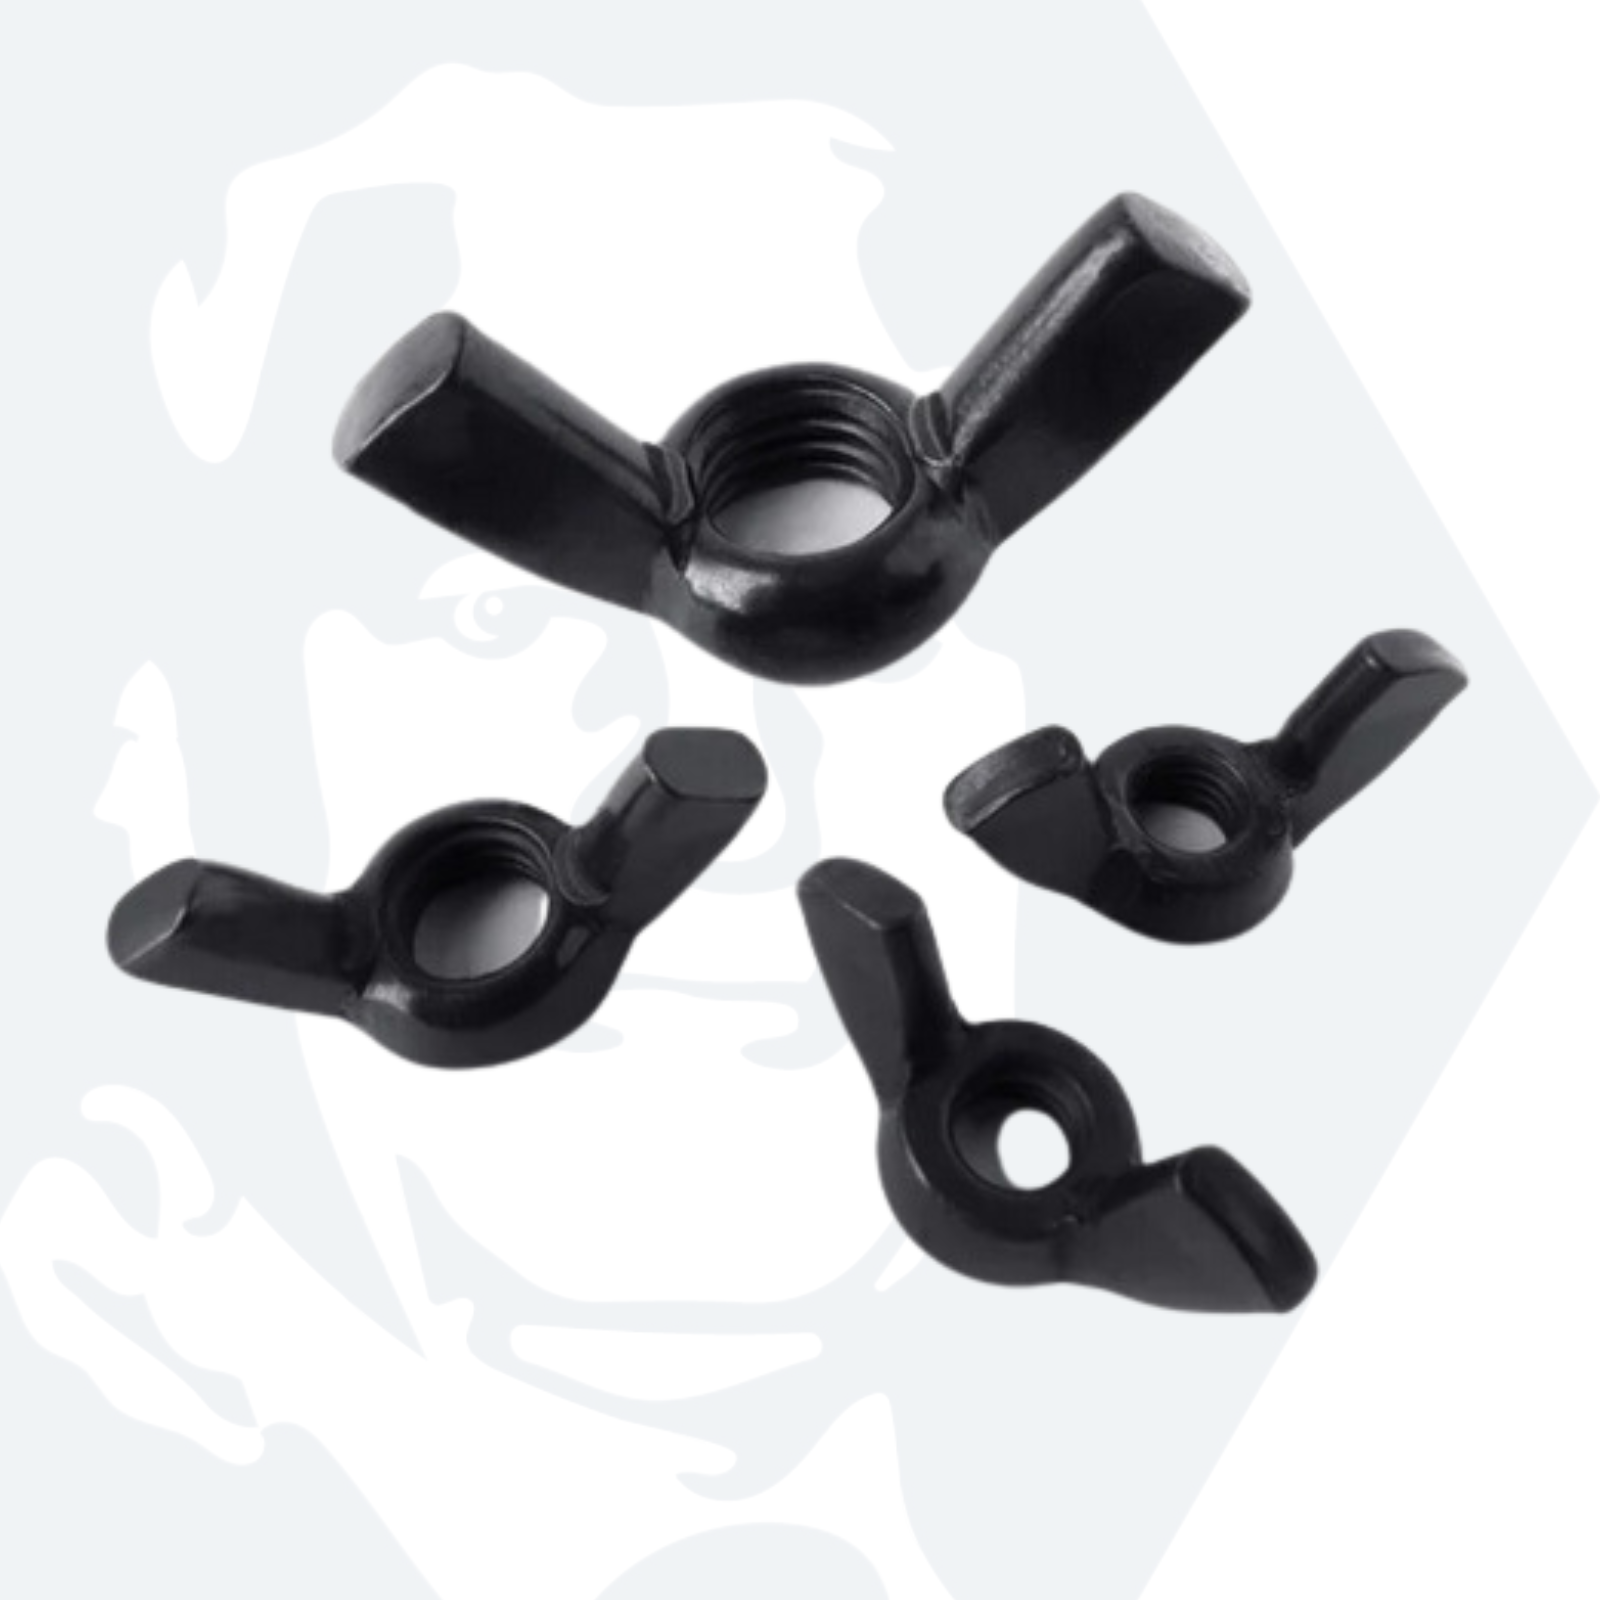 M10 Wing Nut (DIN 315) - Black Stainless Steel (A2)